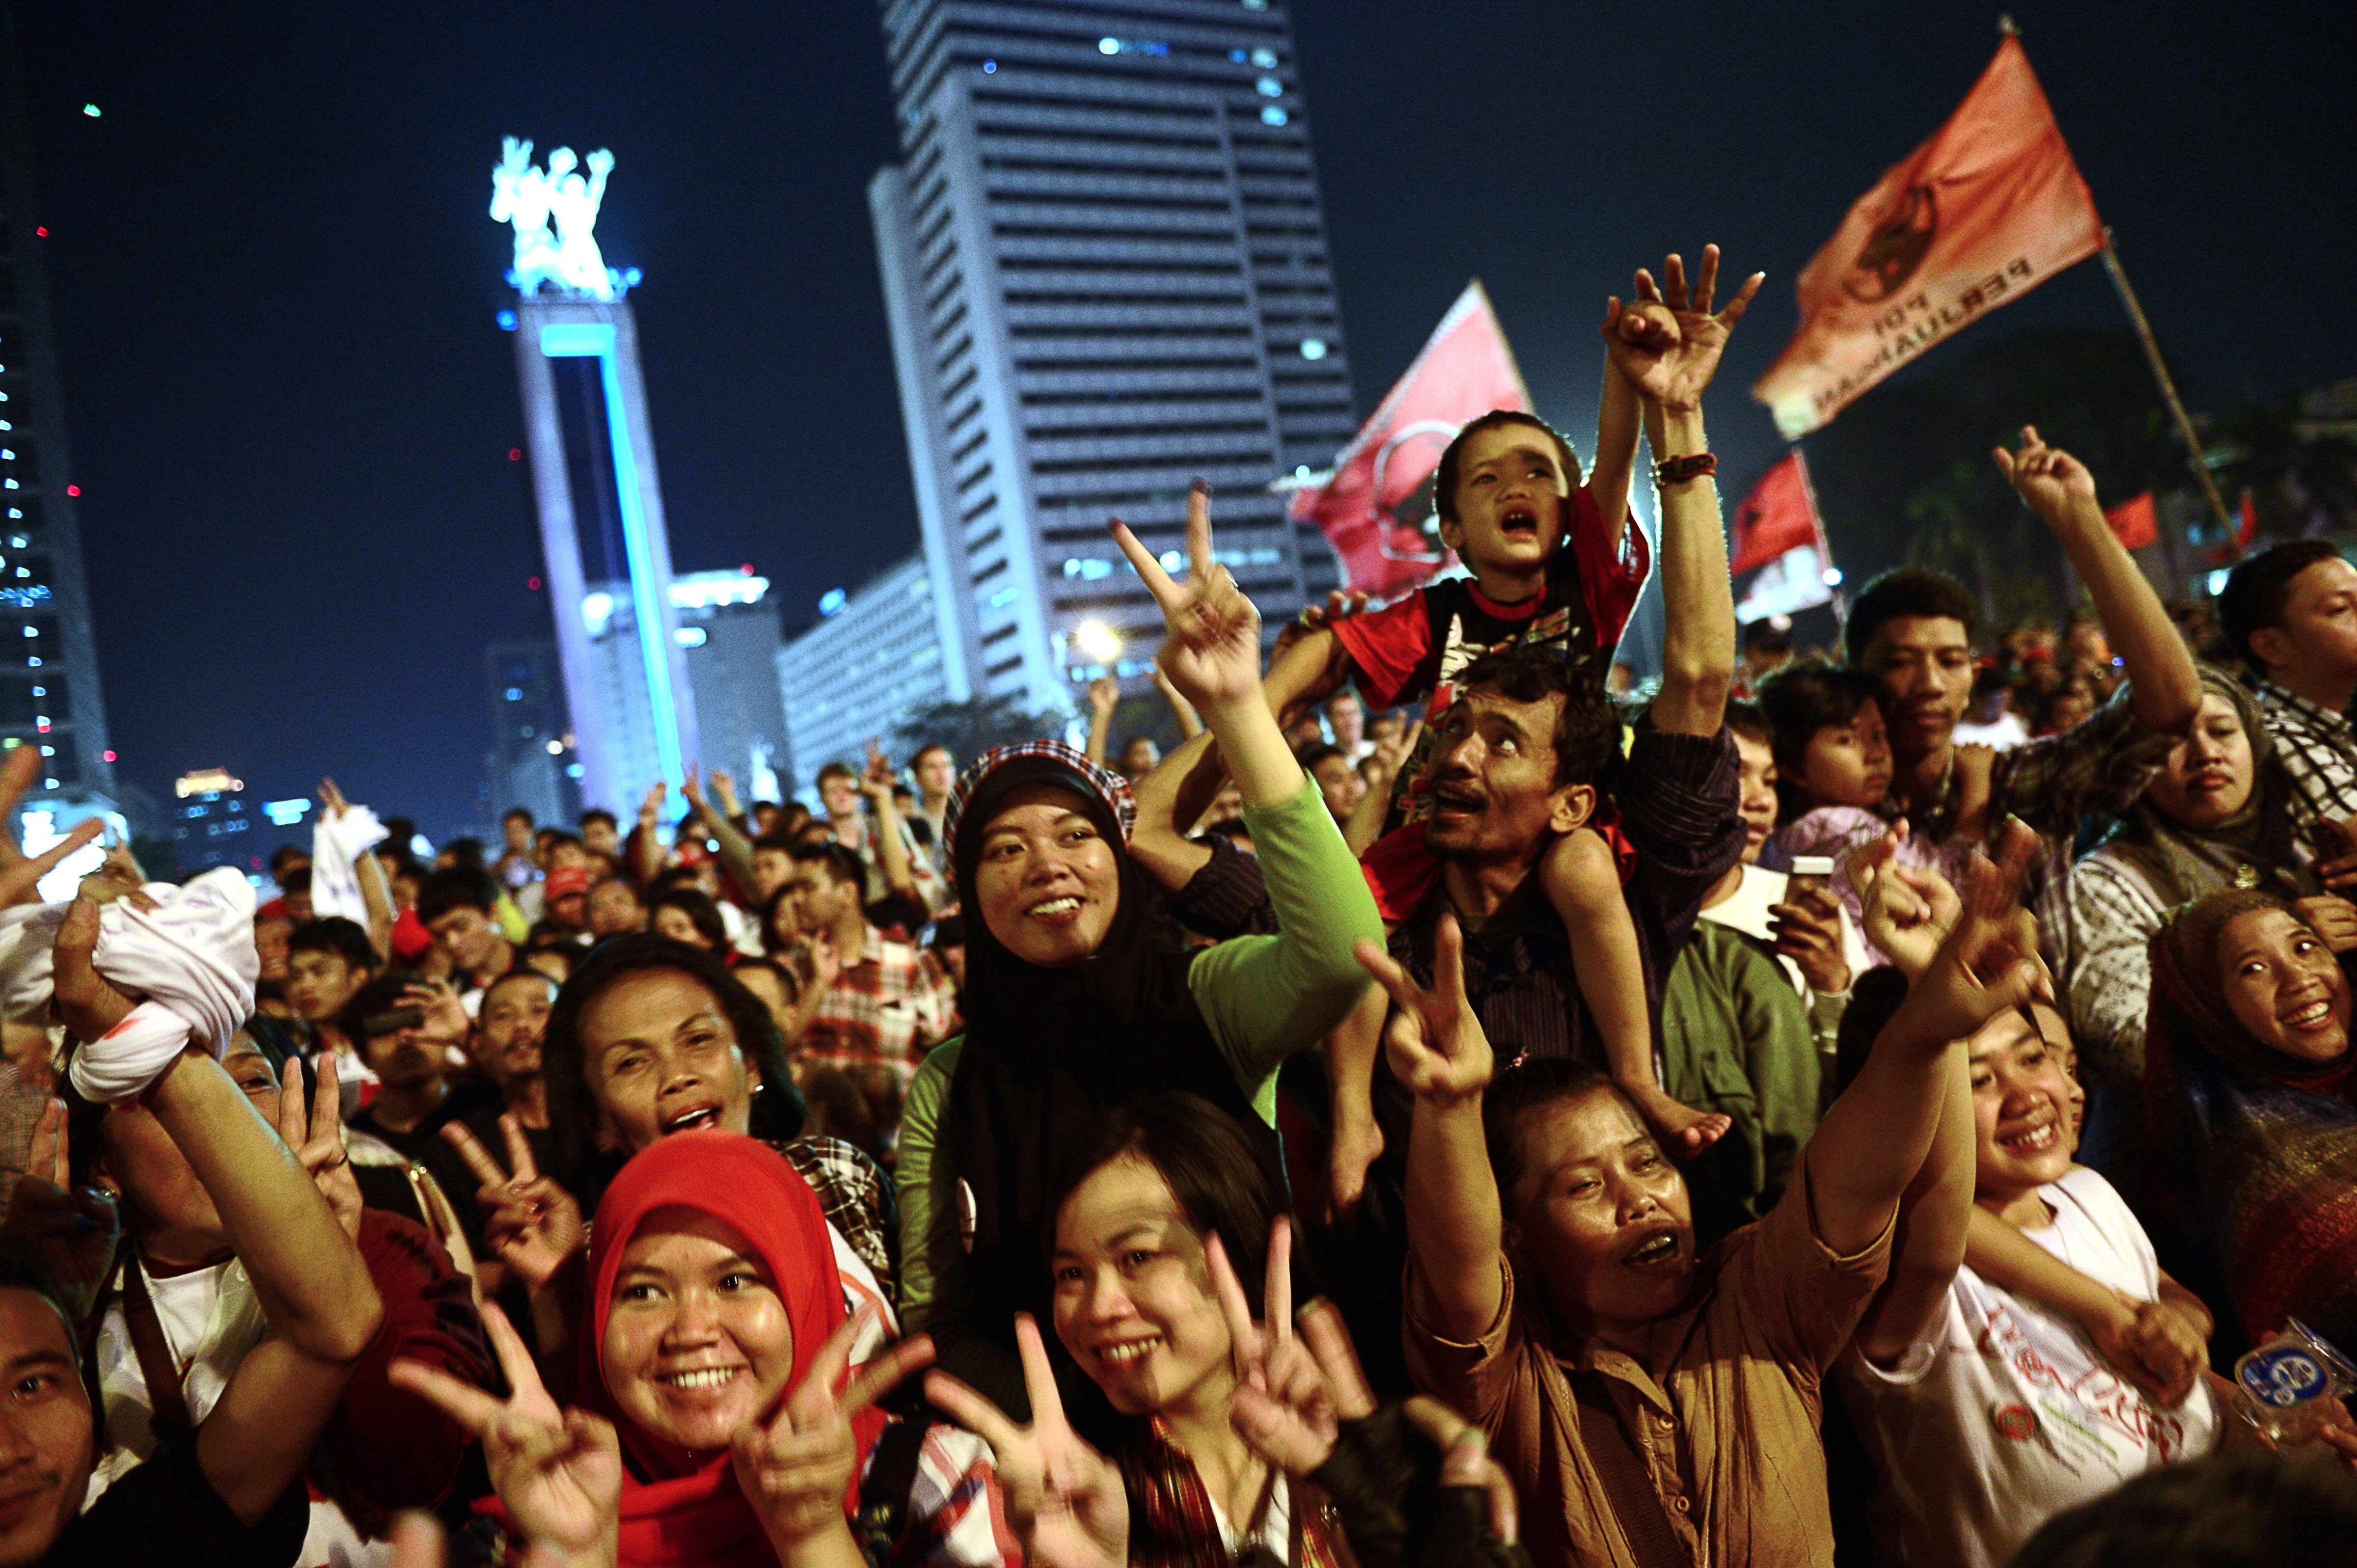 Supporters of Indonesian presidential candidate Joko Widodo rally in central Jakarta after the close of polls on July 9, 2014 (ROMEO GACAD—AFP/Getty Images)